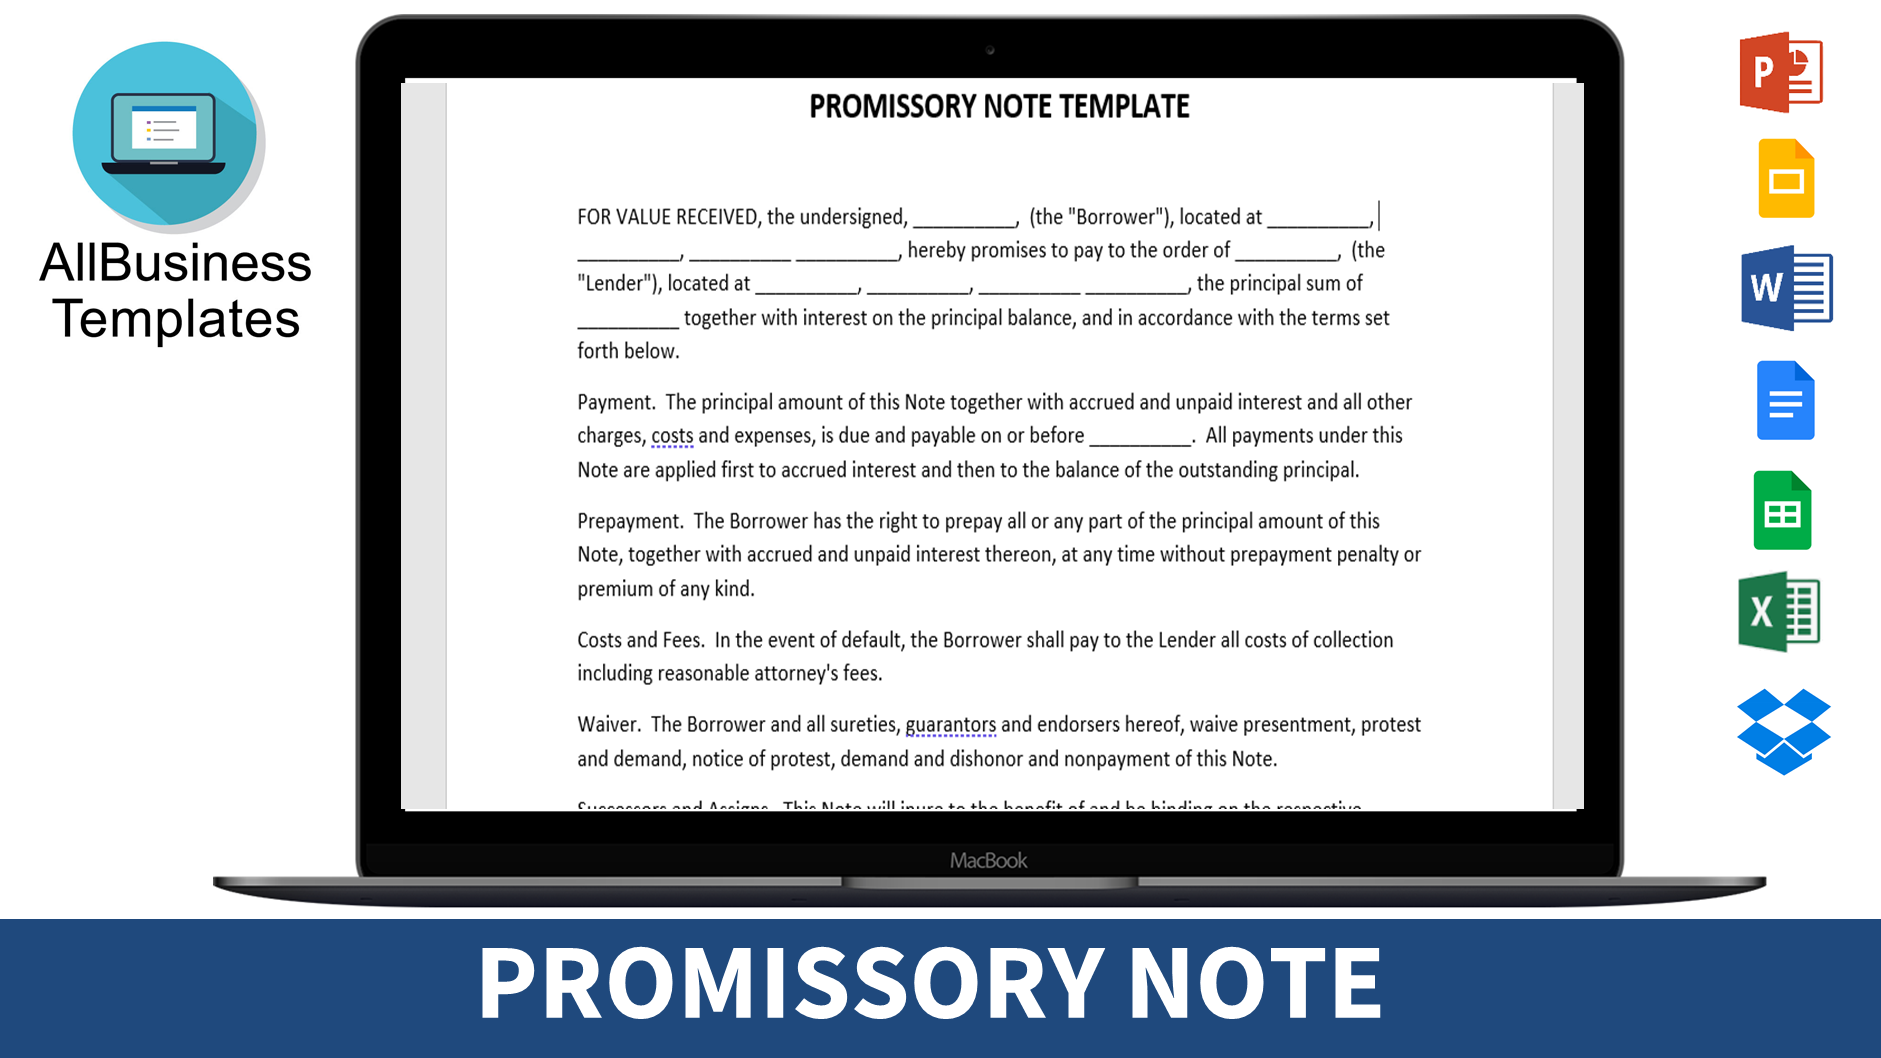 Promissory Note example template main image